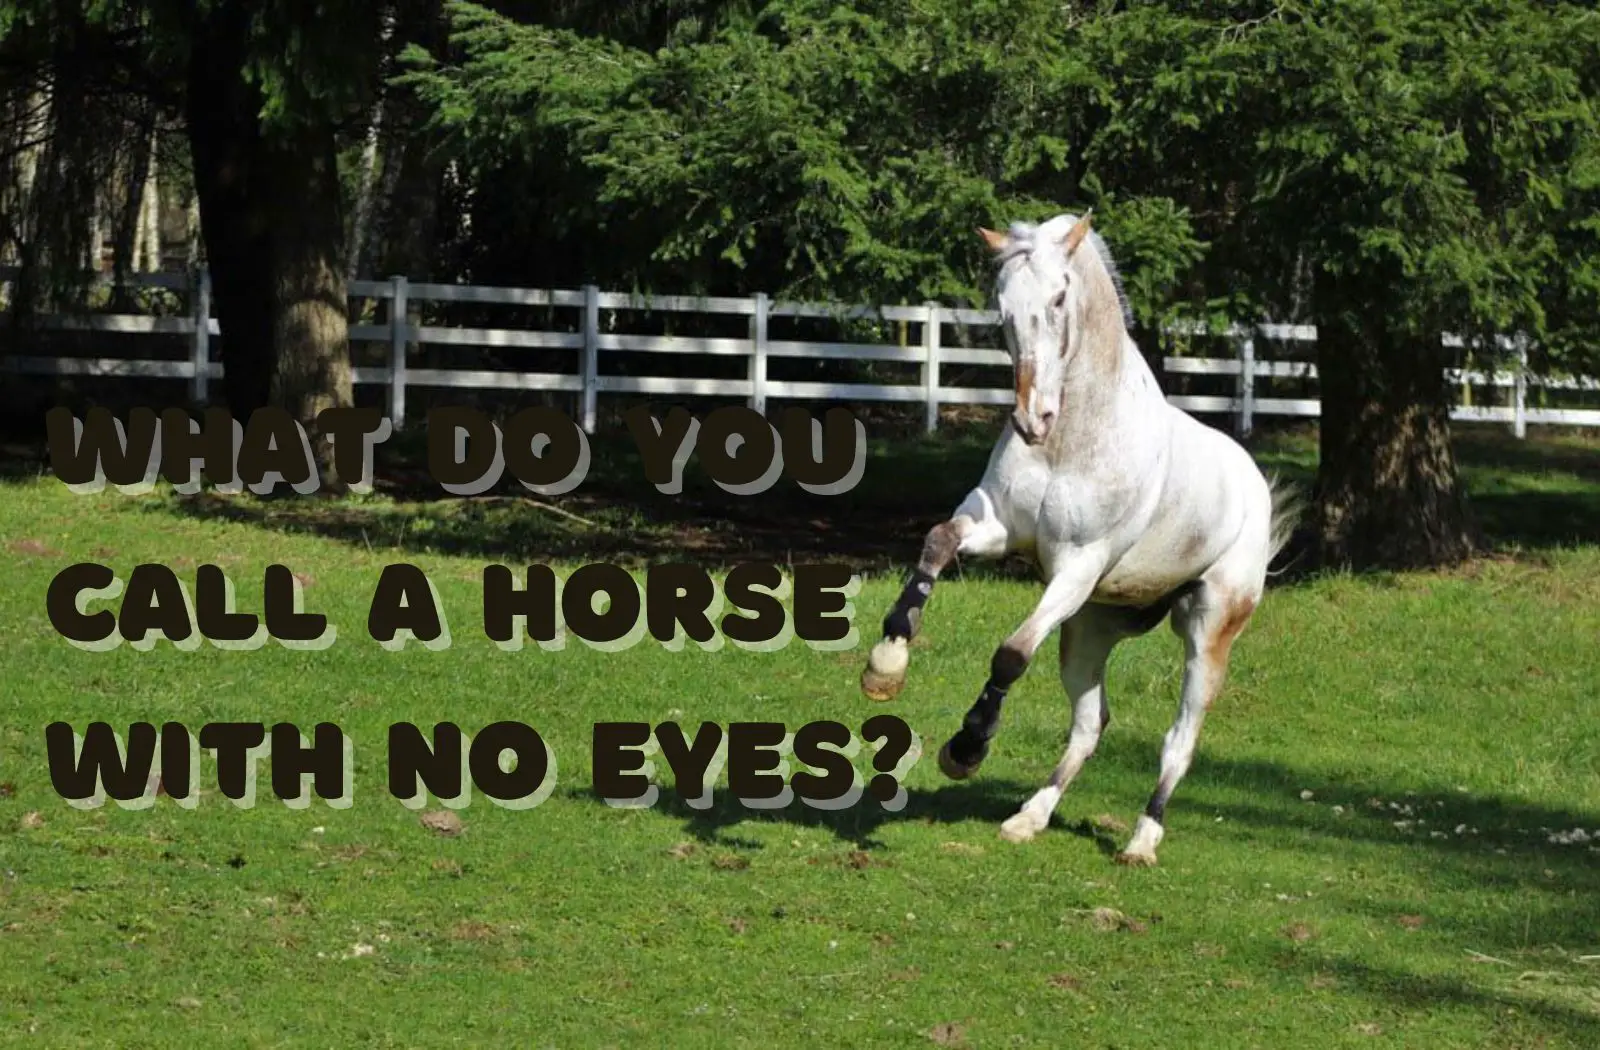 What Do You Call a Horse With No Eyes?